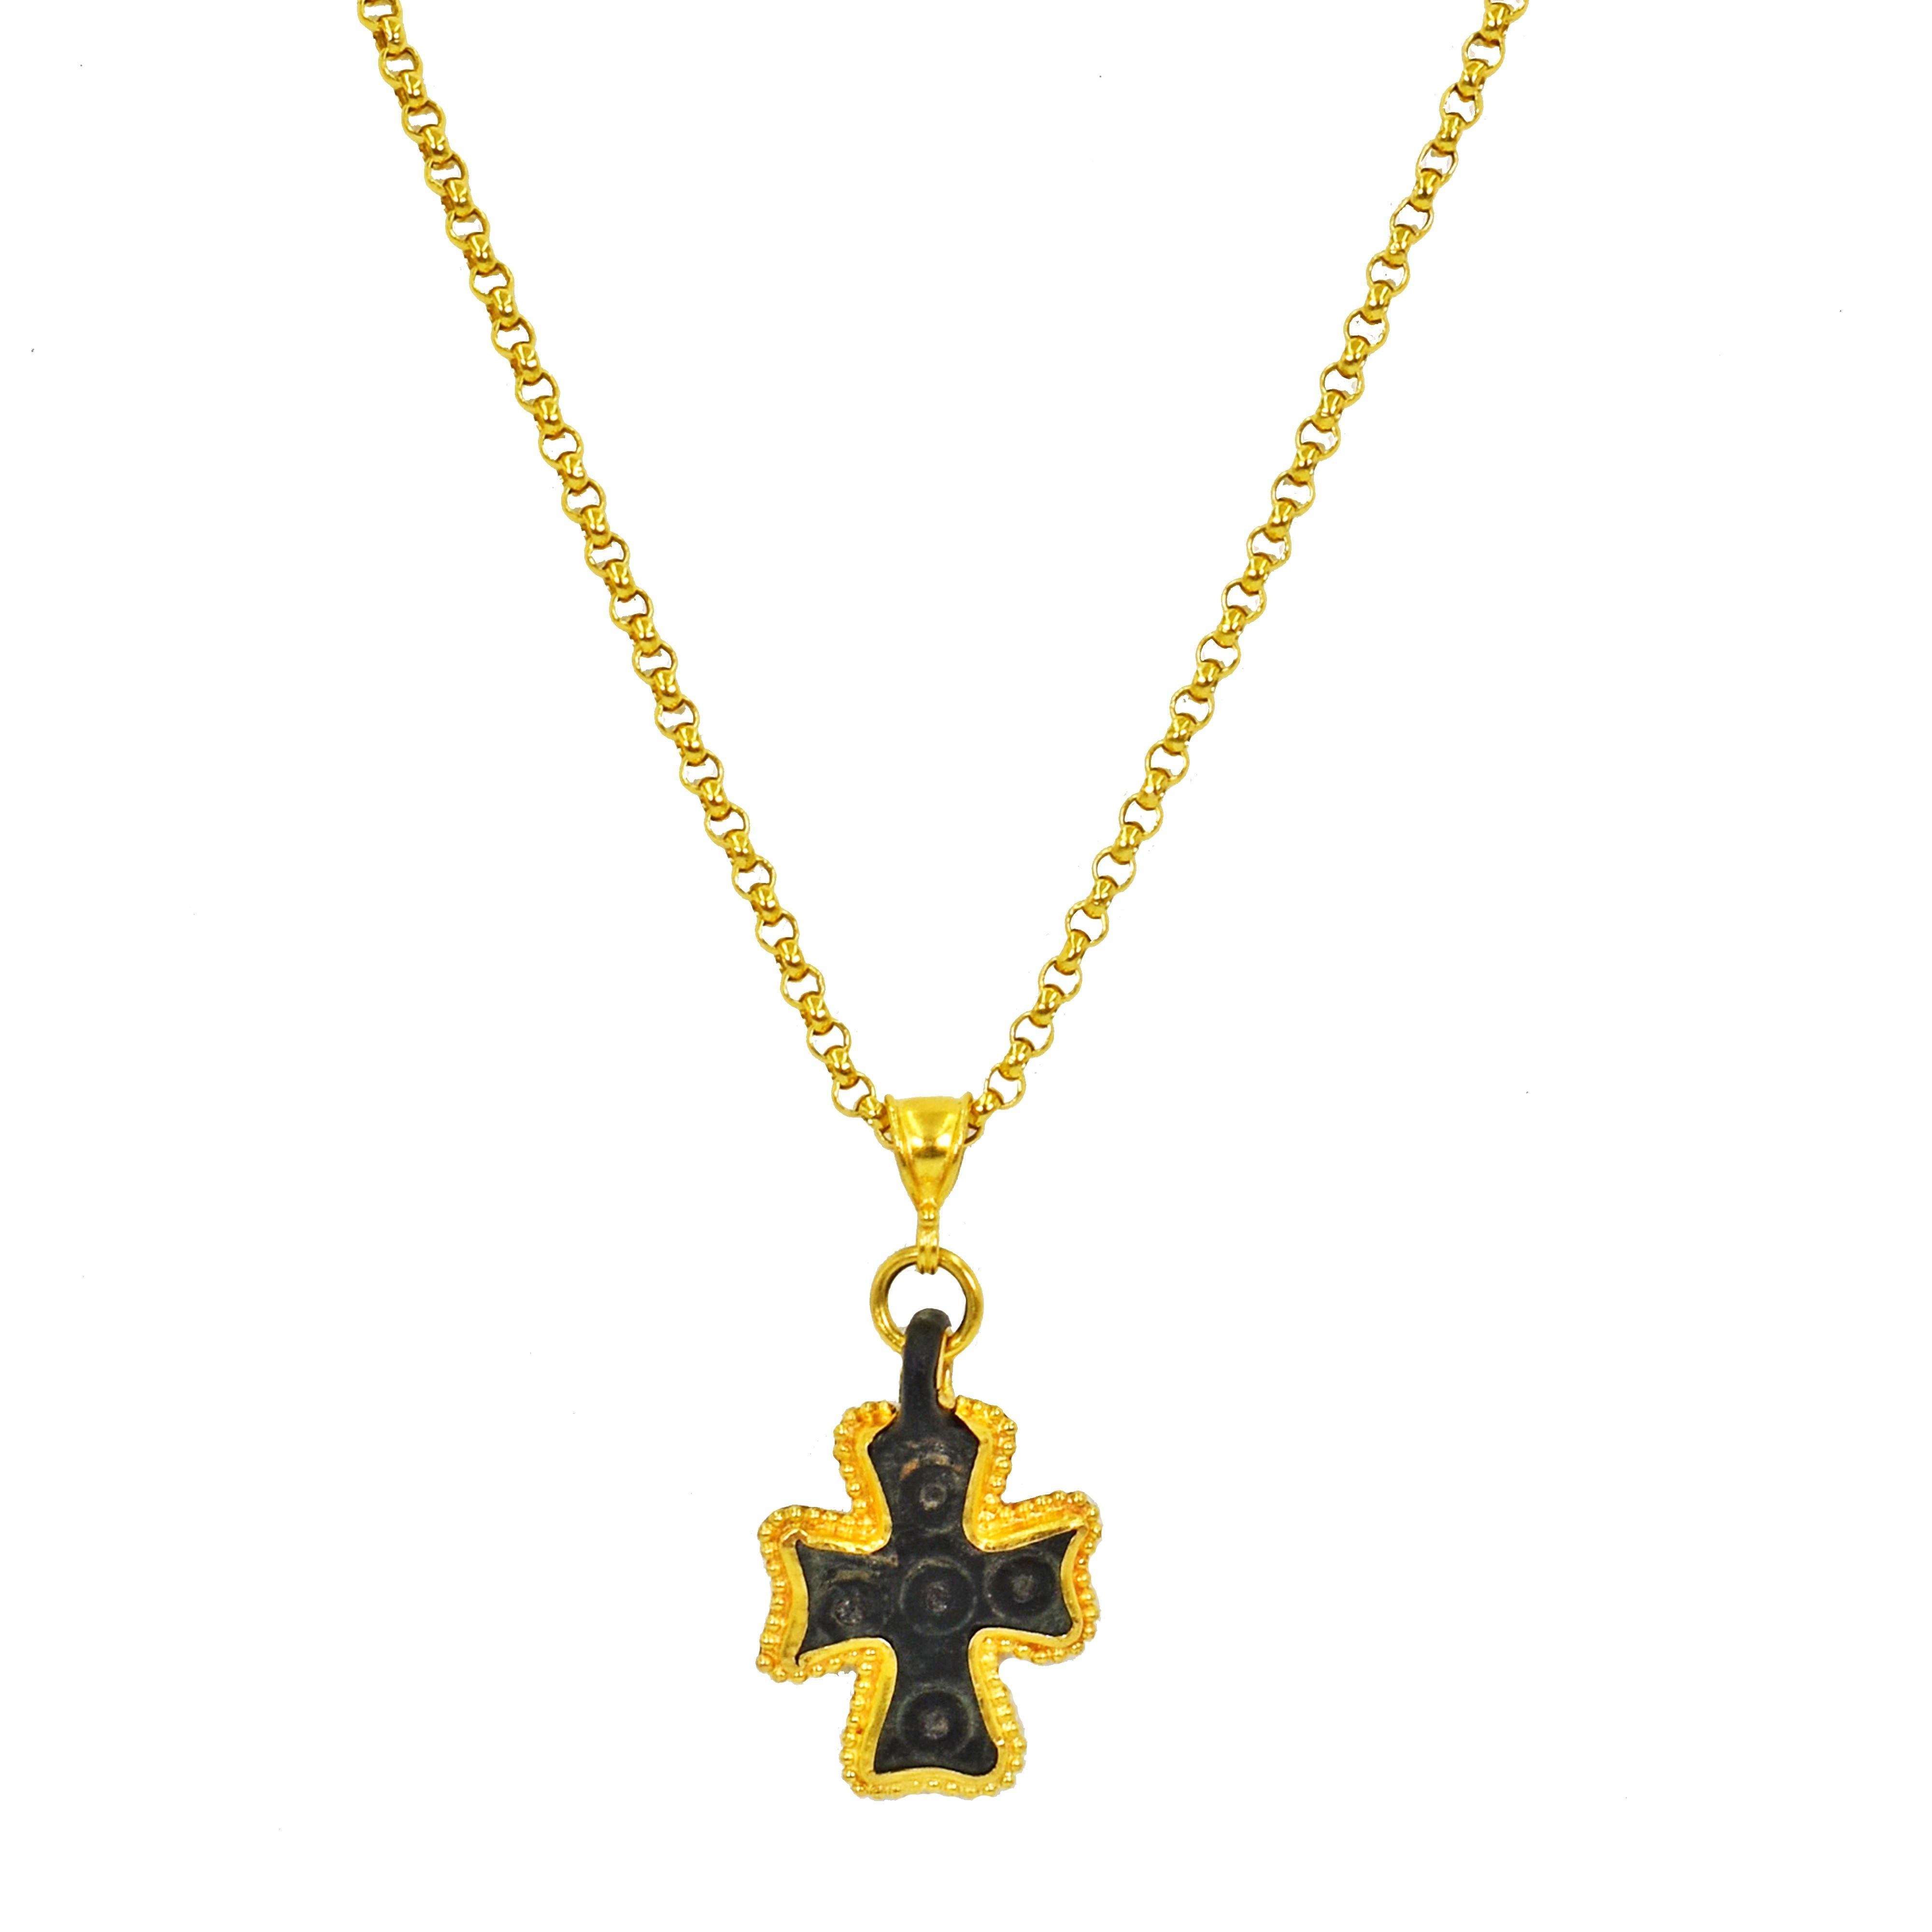 Authentic ancient Byzantine Era Roman bronze cross pendant with contemporary added 22k yellow gold details on an 18 inch 21k gold Rolo chain necklace. Pendant, including bail, is 1.44 inch in length. Bronze cross is in good, ancient condition with